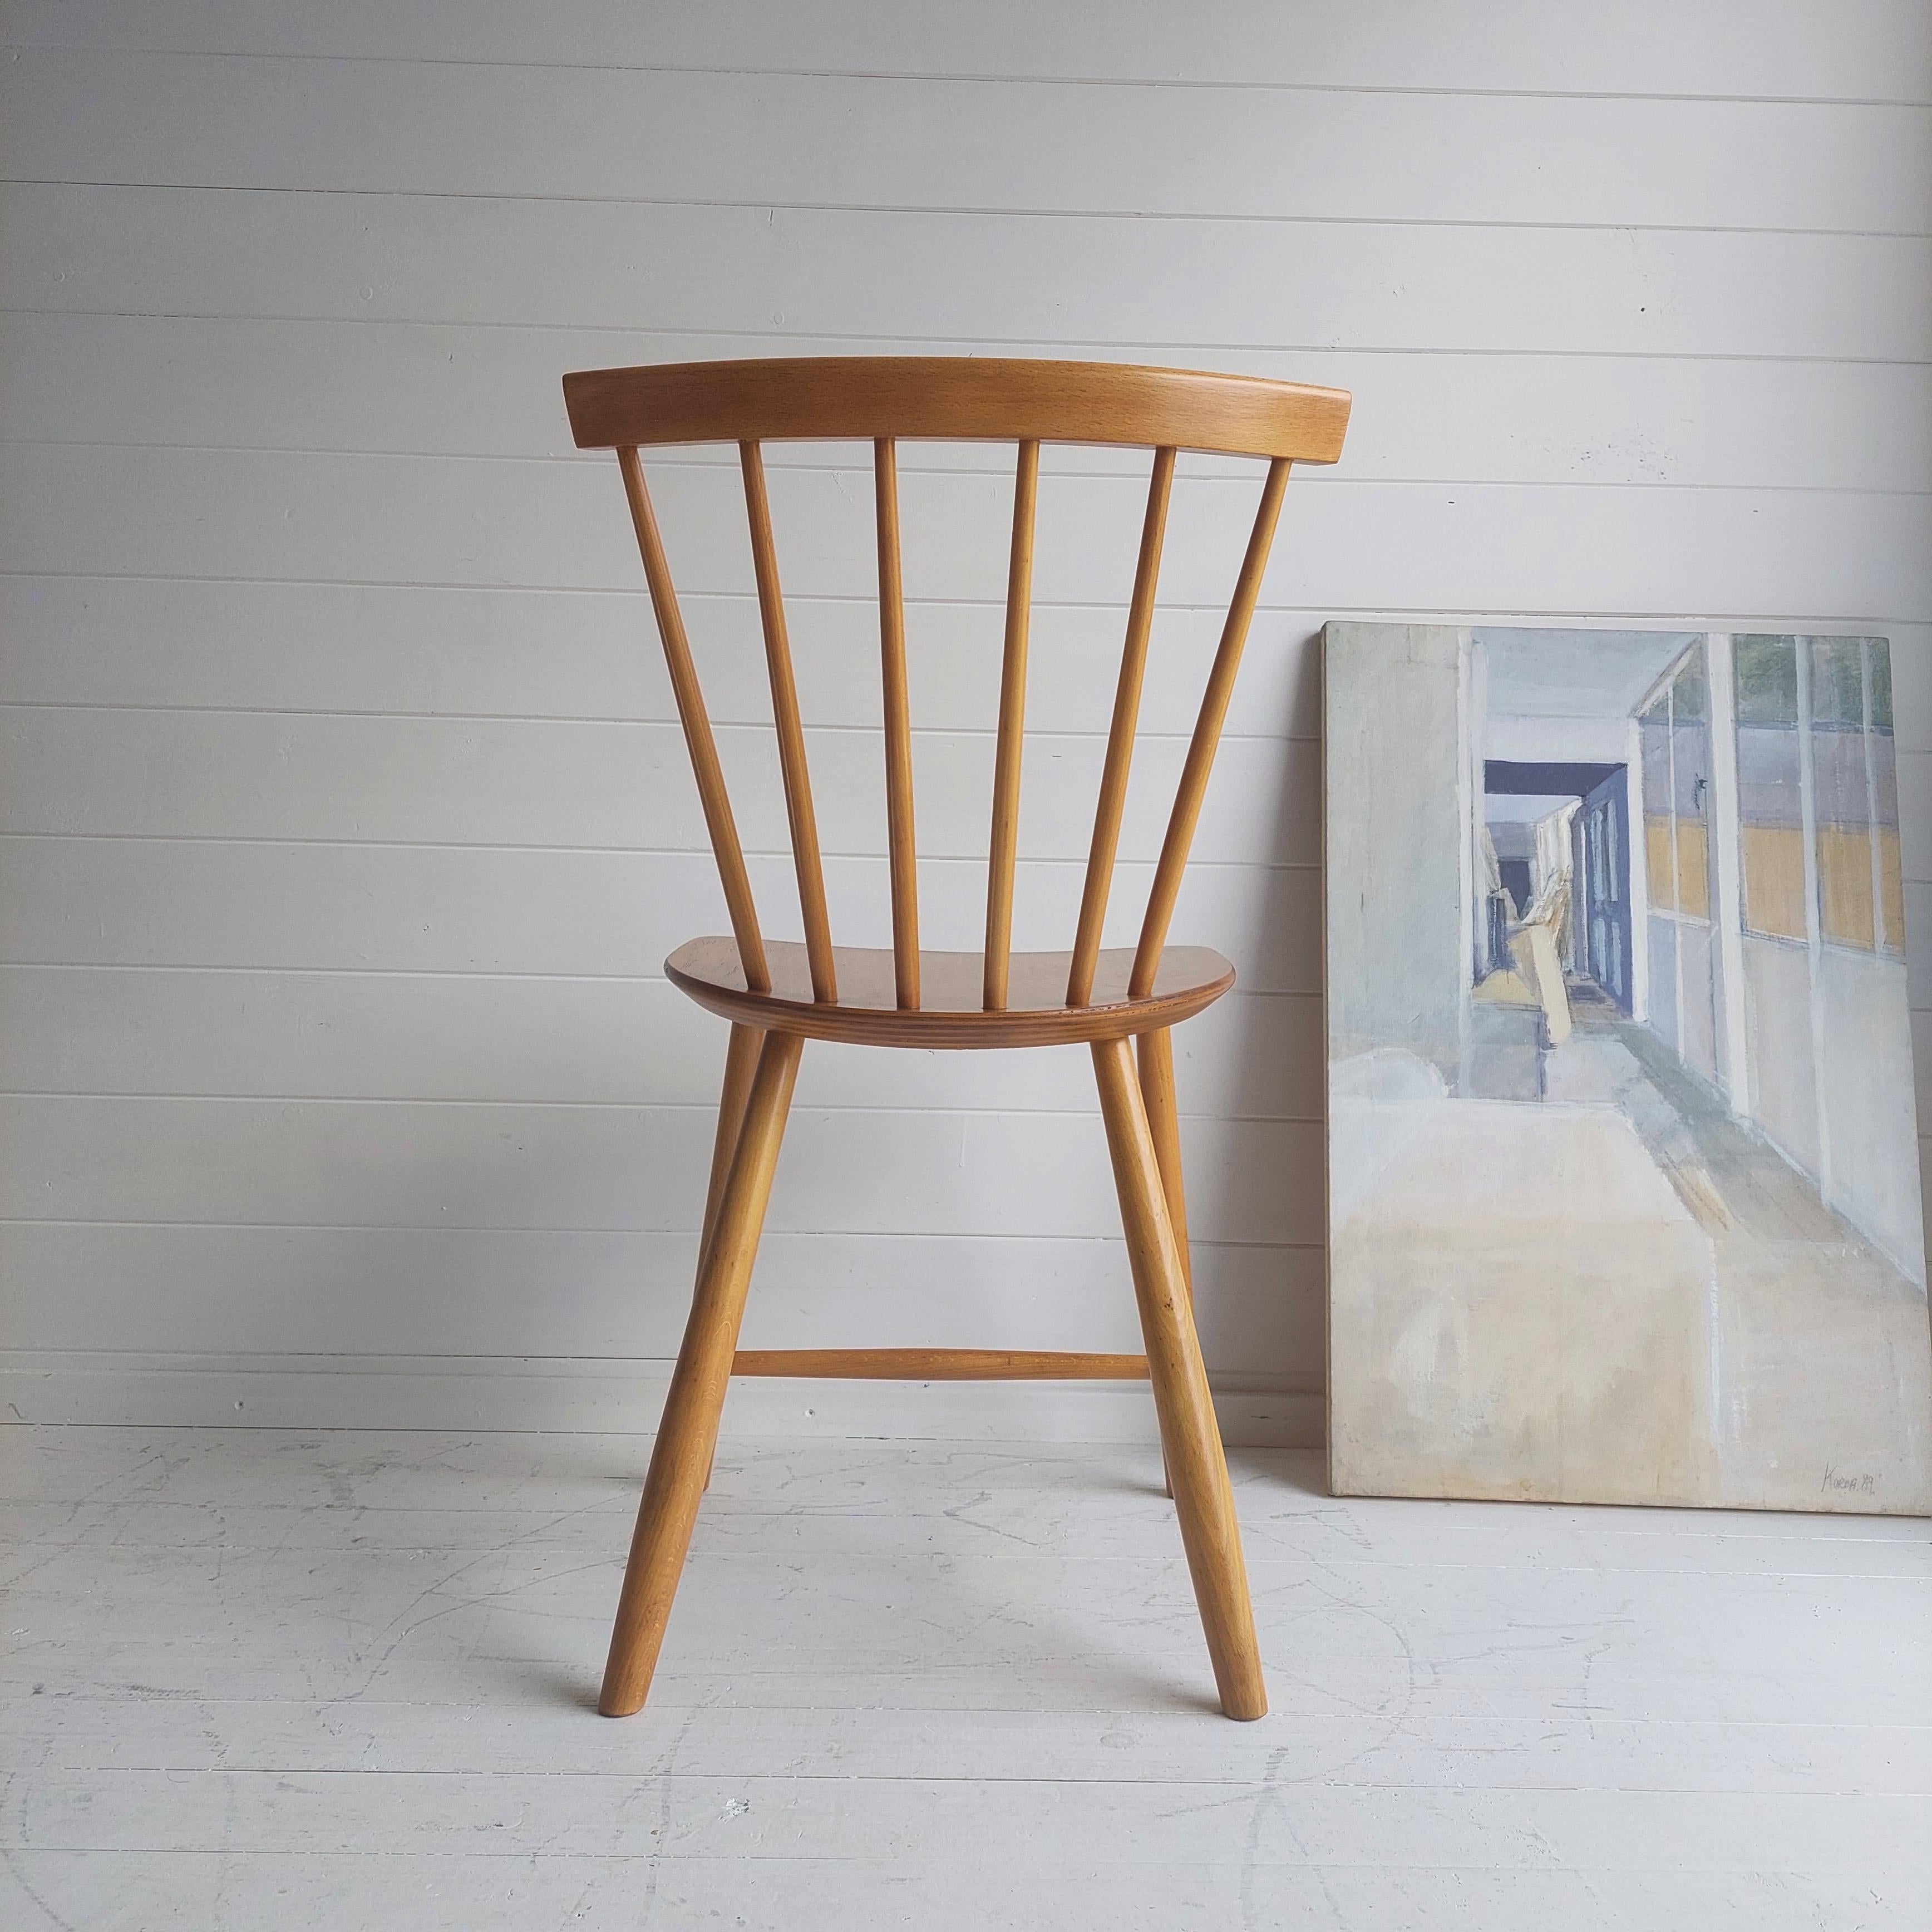 Danish Mid Century J46 Dining Kitchen Chair by Poul Volther for Fdb, Denmark, 1960s